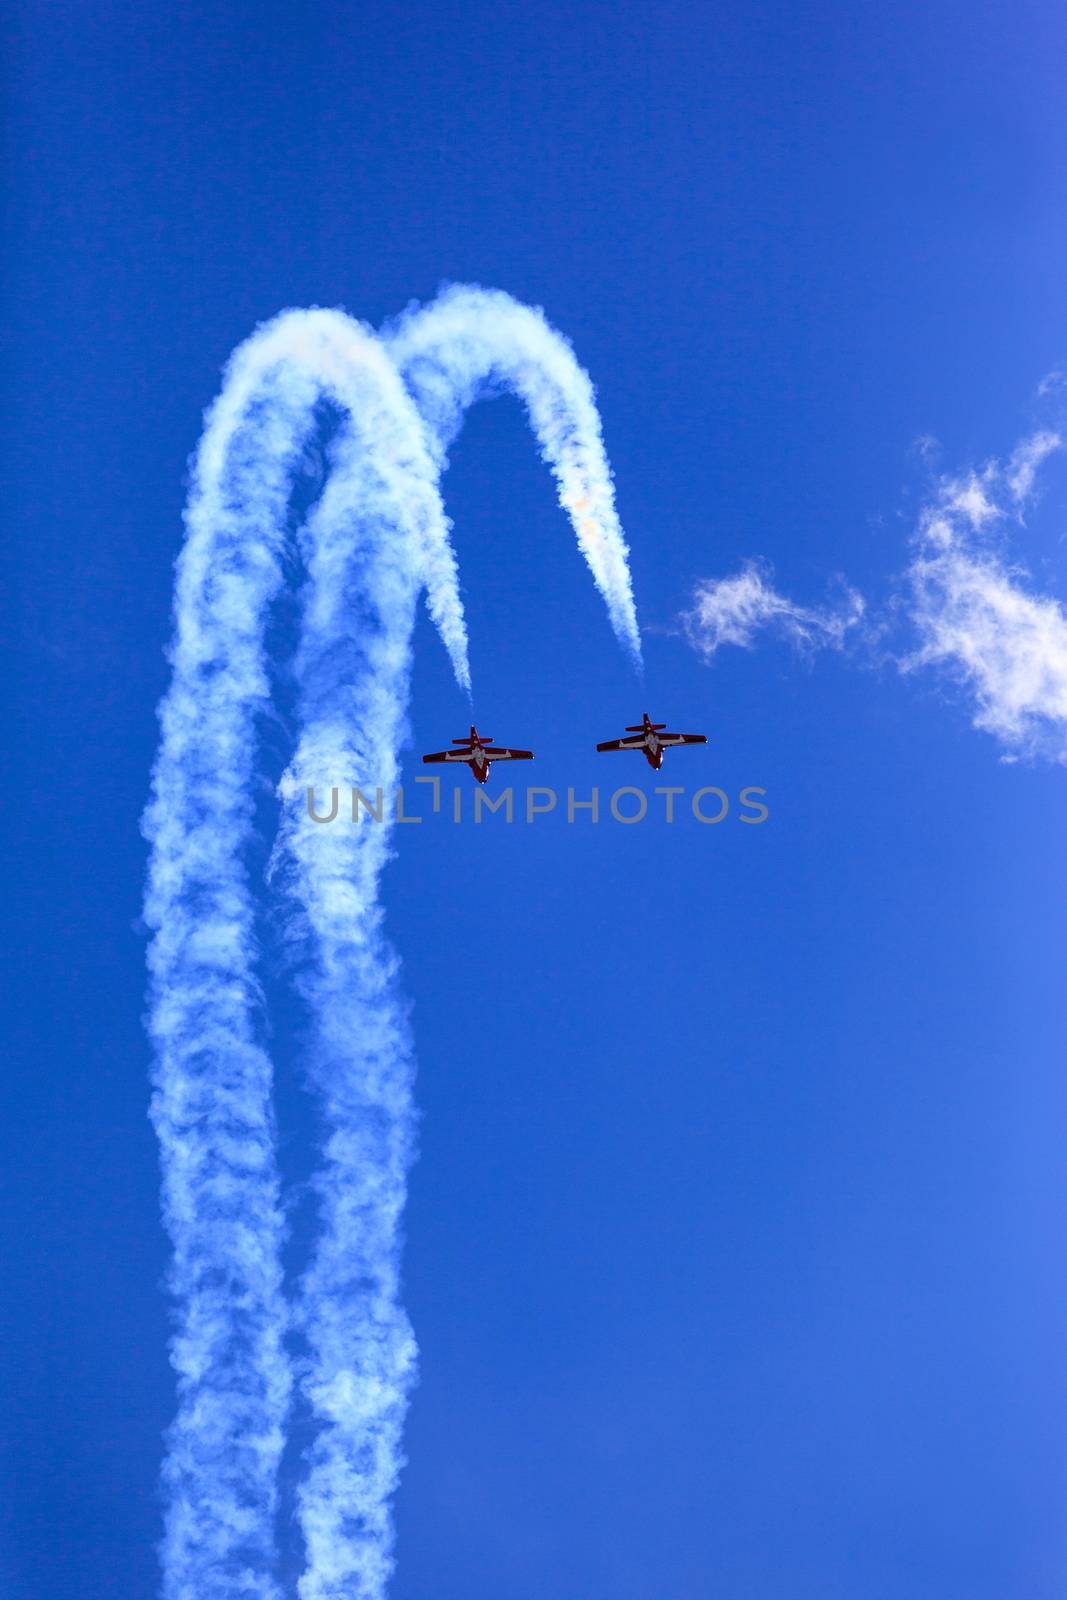 LETHBRIDGE CANADA - JUN 25, 2015: The Snowbirds Demonstration Team demonstrate the skill, professionalism, and teamwork of Canadian Forces personnel during  Wing Over Lethbridge Air Show.